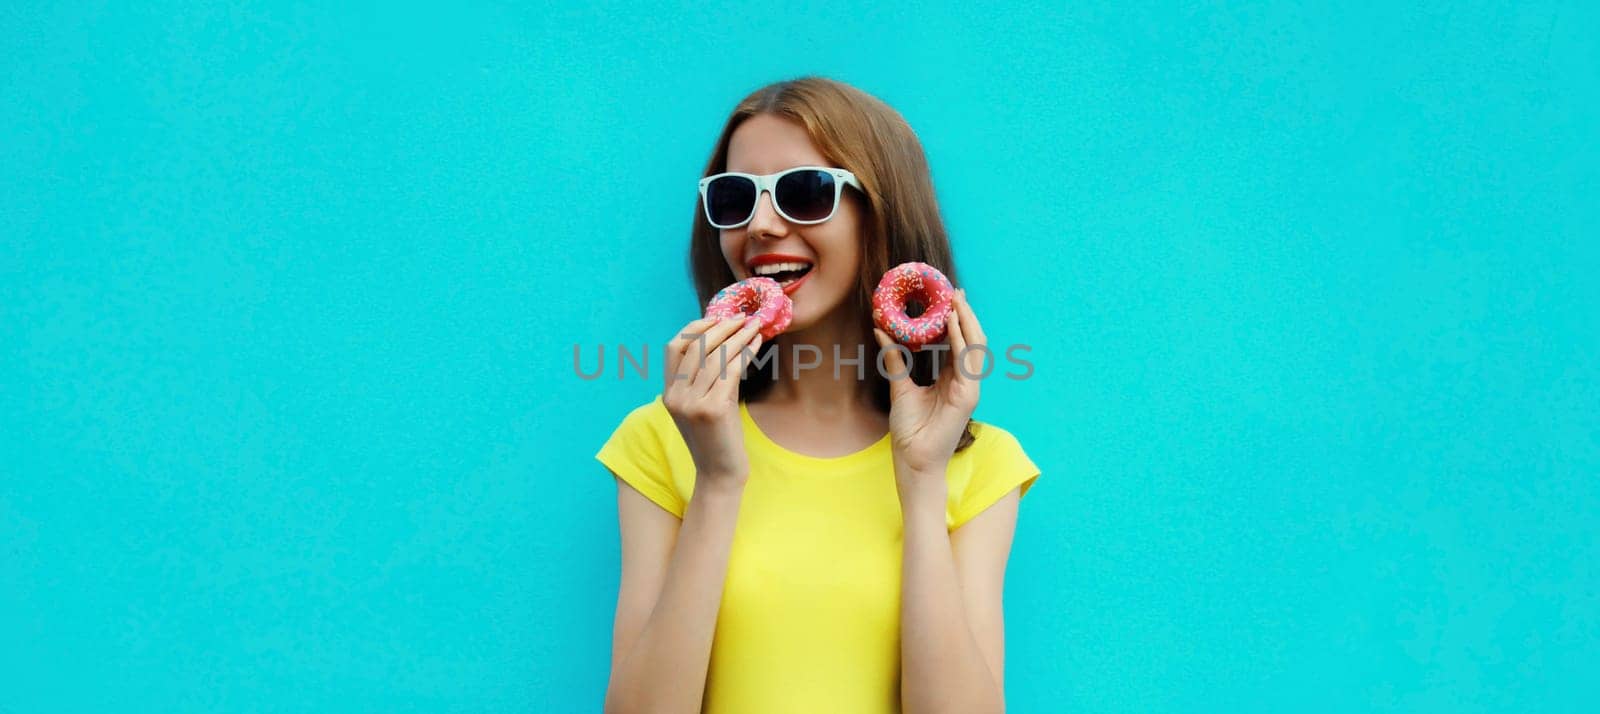 Portrait happy cheerful smiling young woman with sweet donut having fun on blue background by Rohappy